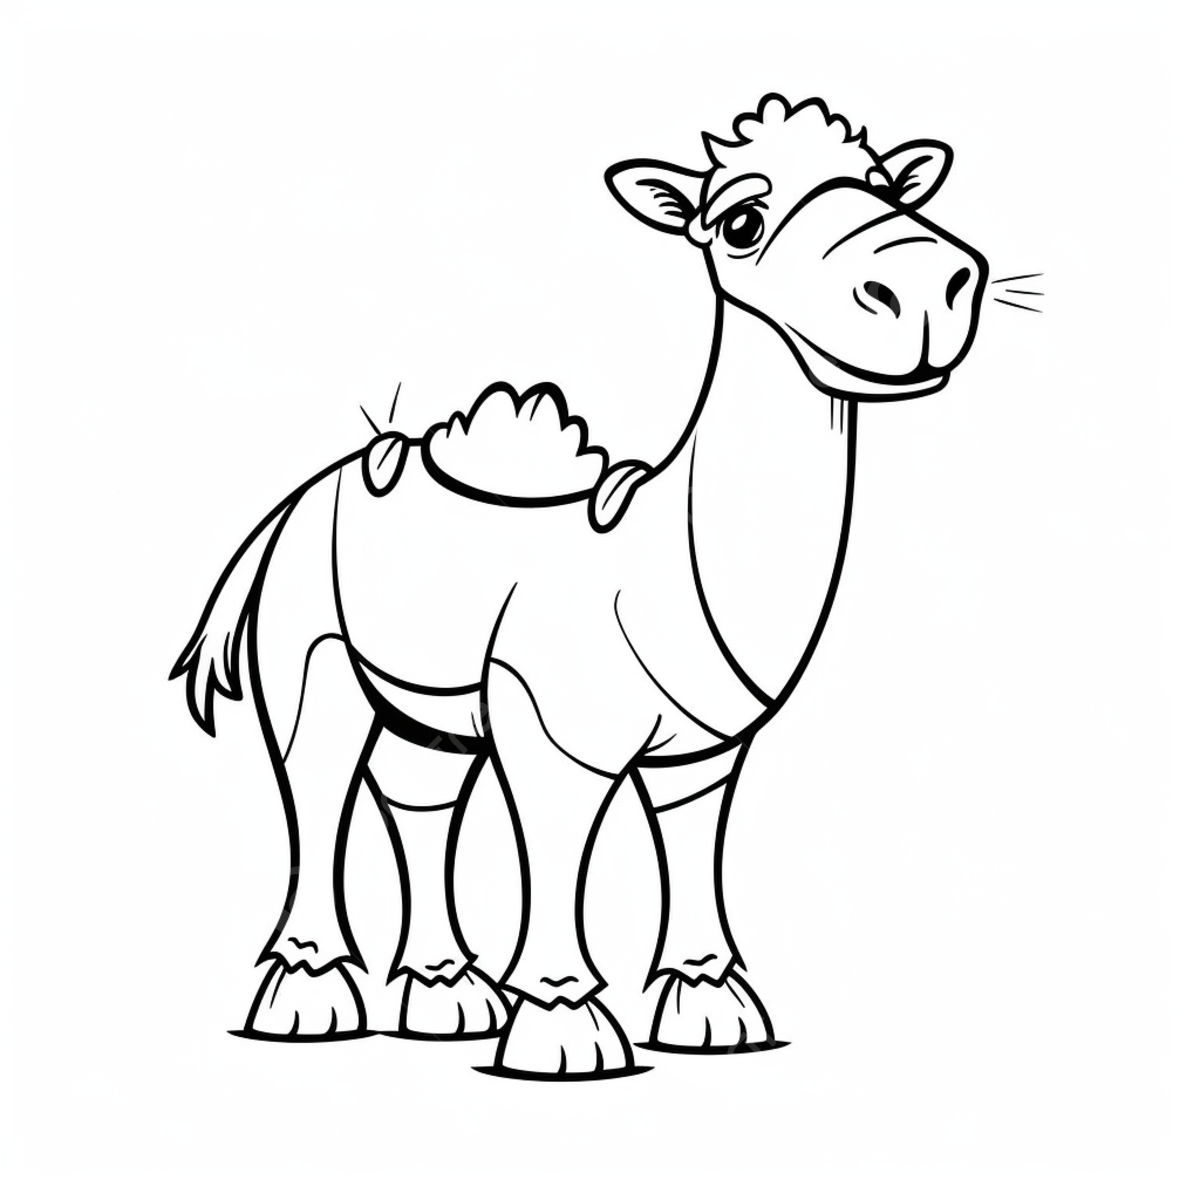 Disney camel coloring page for kids ring drawing kid drawing camel drawing png transparent image and clipart for free download